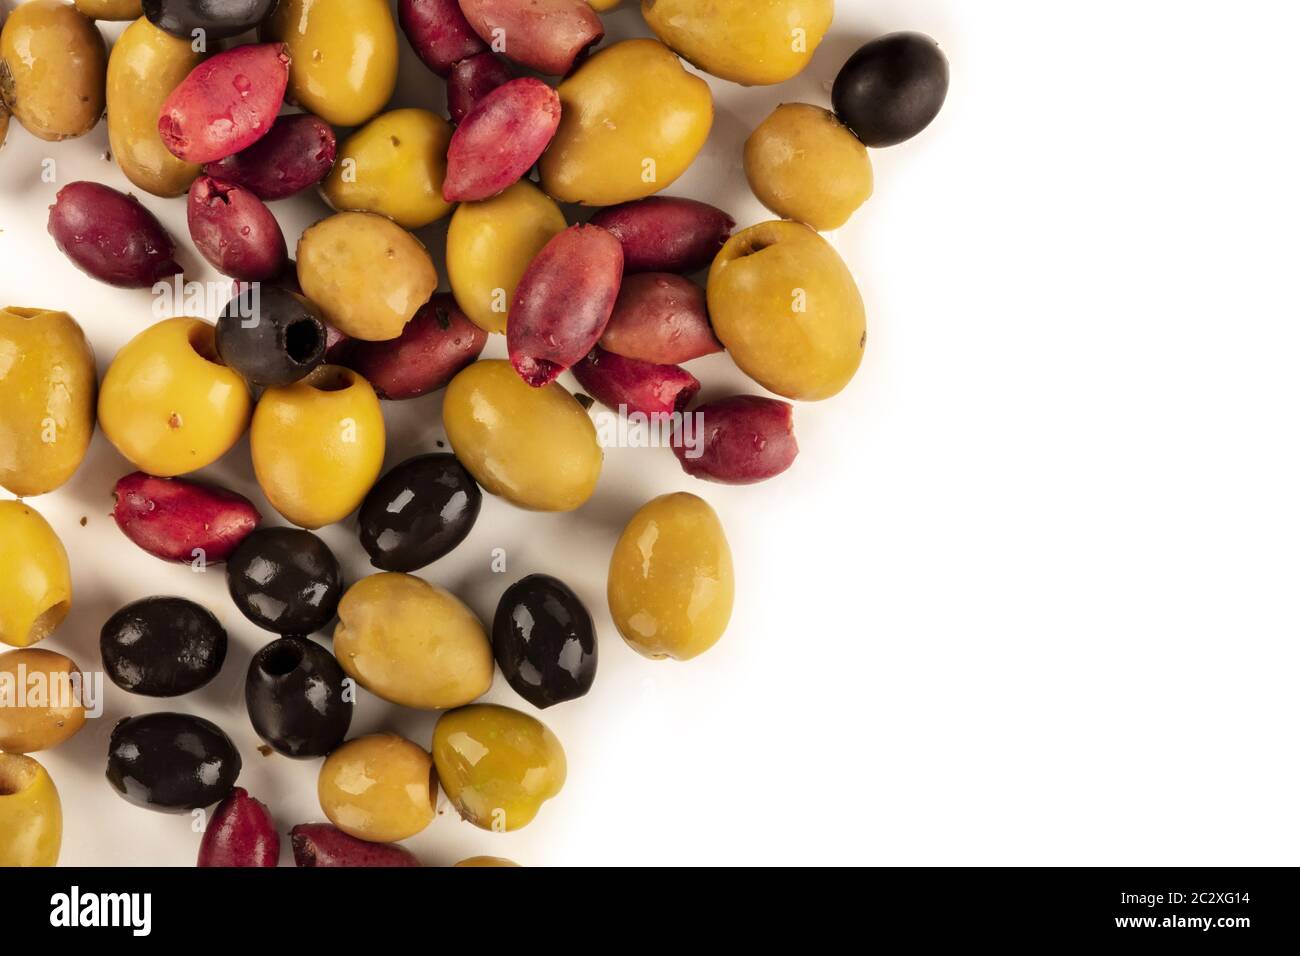 Olives variety. Black, green and brown olives, an assortment, shot from the top on a white background with a place for text Stock Photo